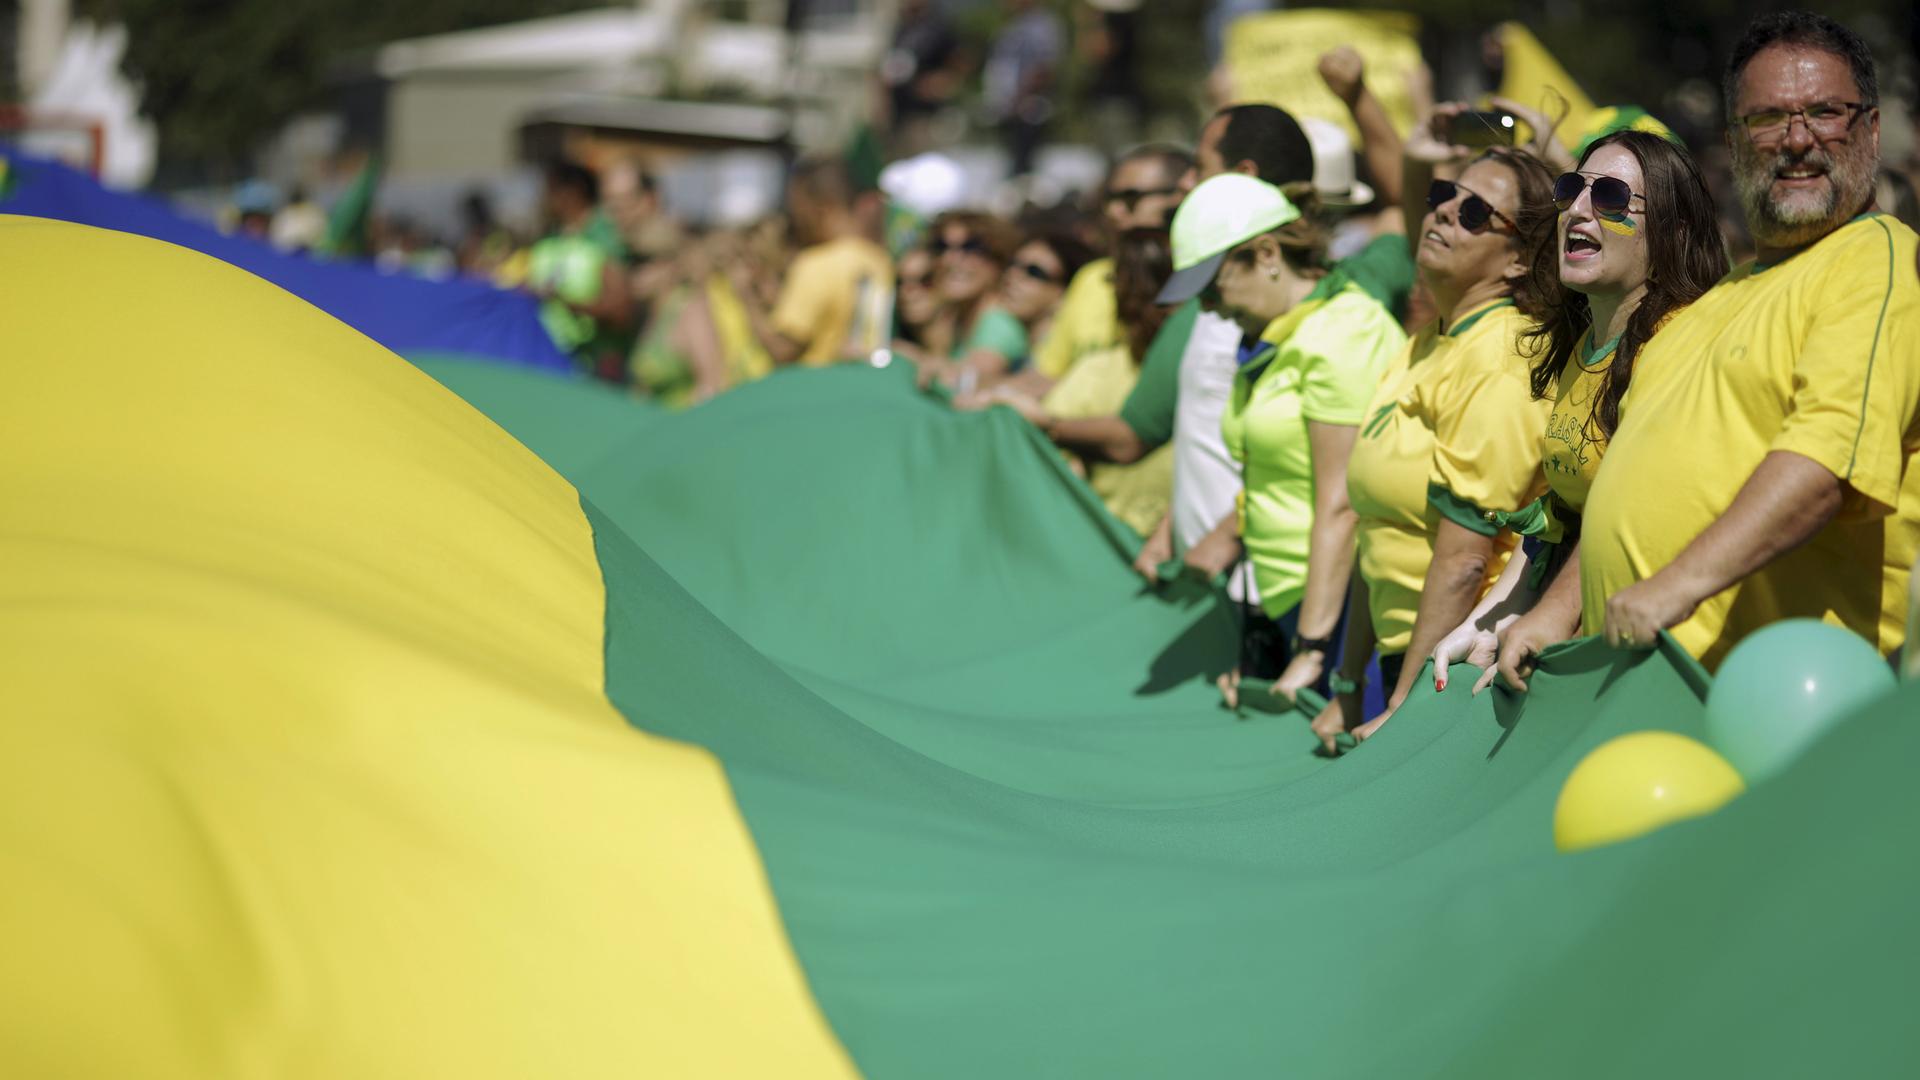 Demonstrators attend a protest against Brazil's President Dilma Rousseff in Copacabana in Rio de Janeiro, Brazil August 16, 2015. 